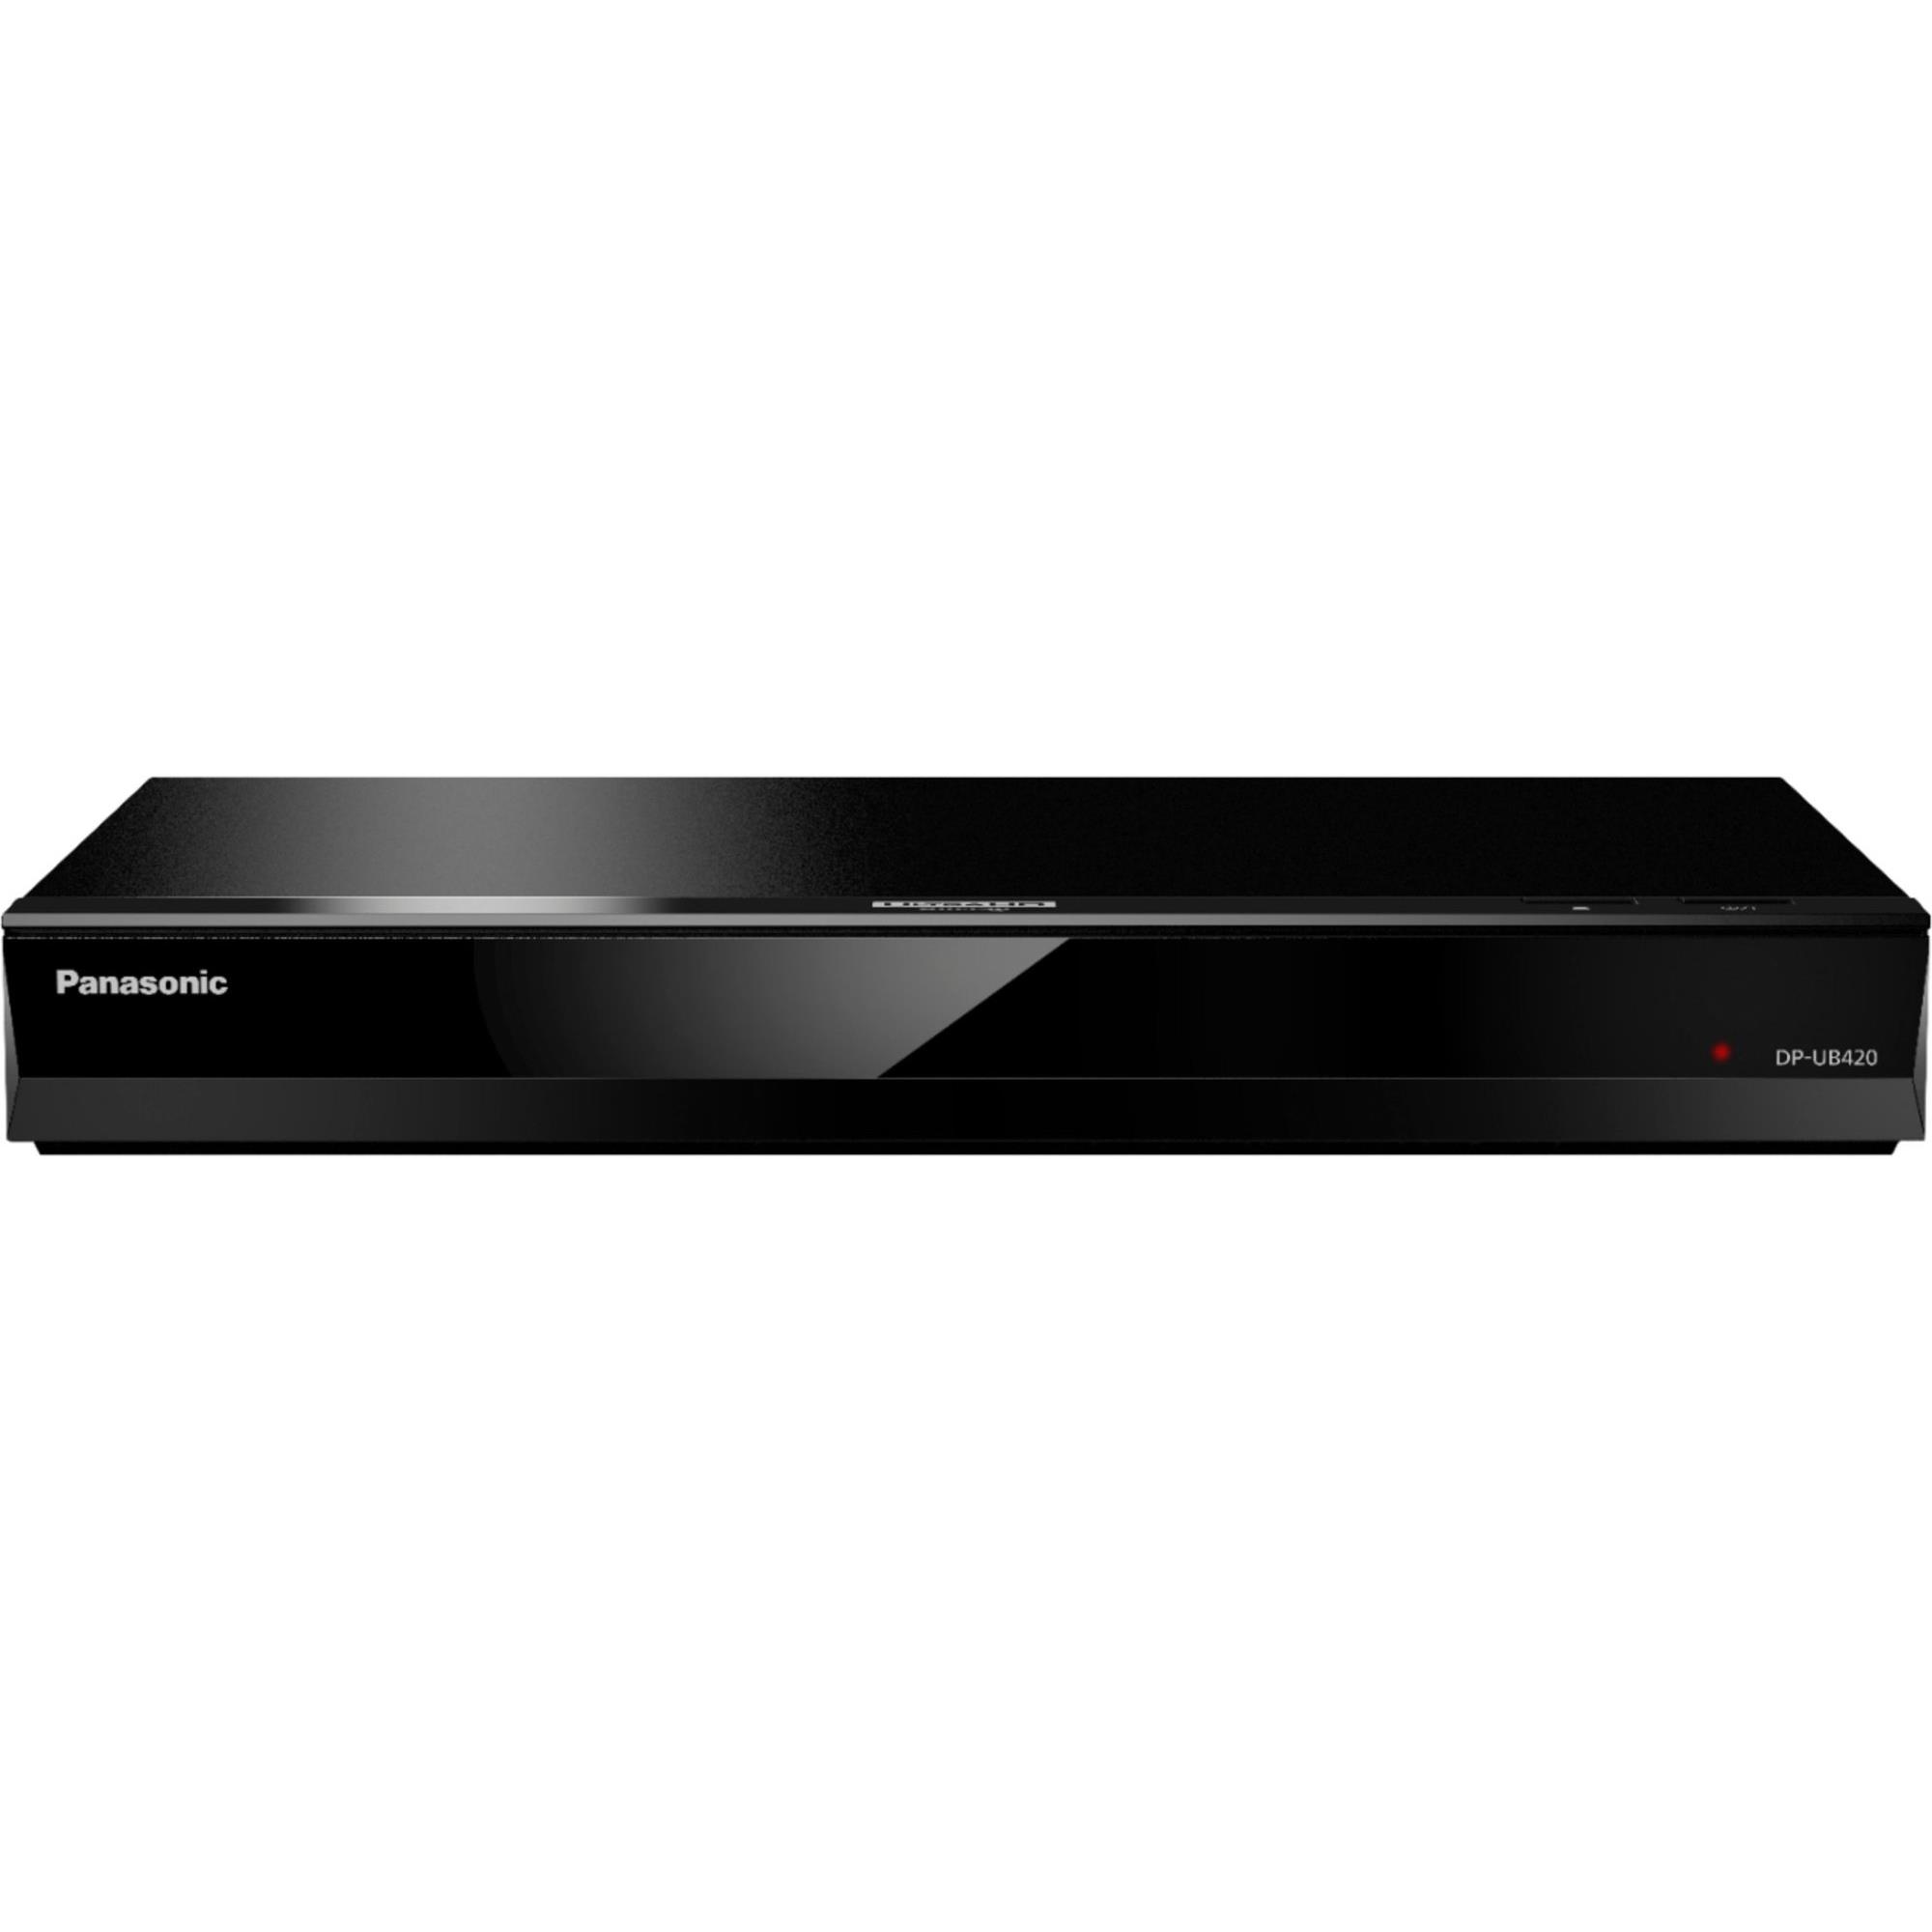 Panasonic Blu-Ray Player DP-UB420-K 4K Ultra HD Smart Media Player with WiFi and Streaming Apps